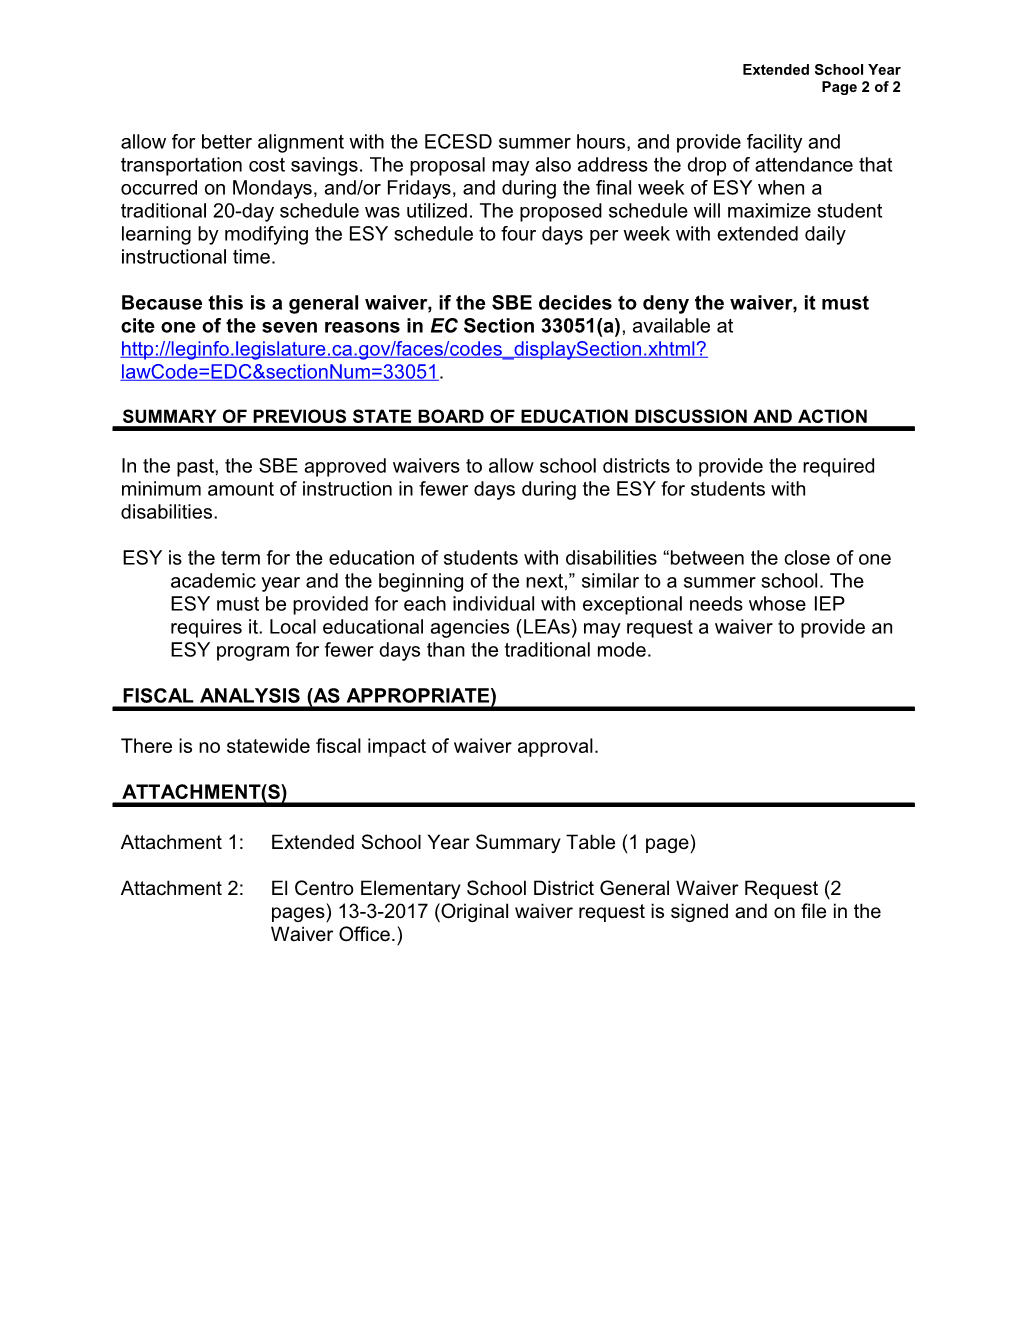 July 2017 Waiver Item W-15 - Meeting Agendas (CA State Board of Education)